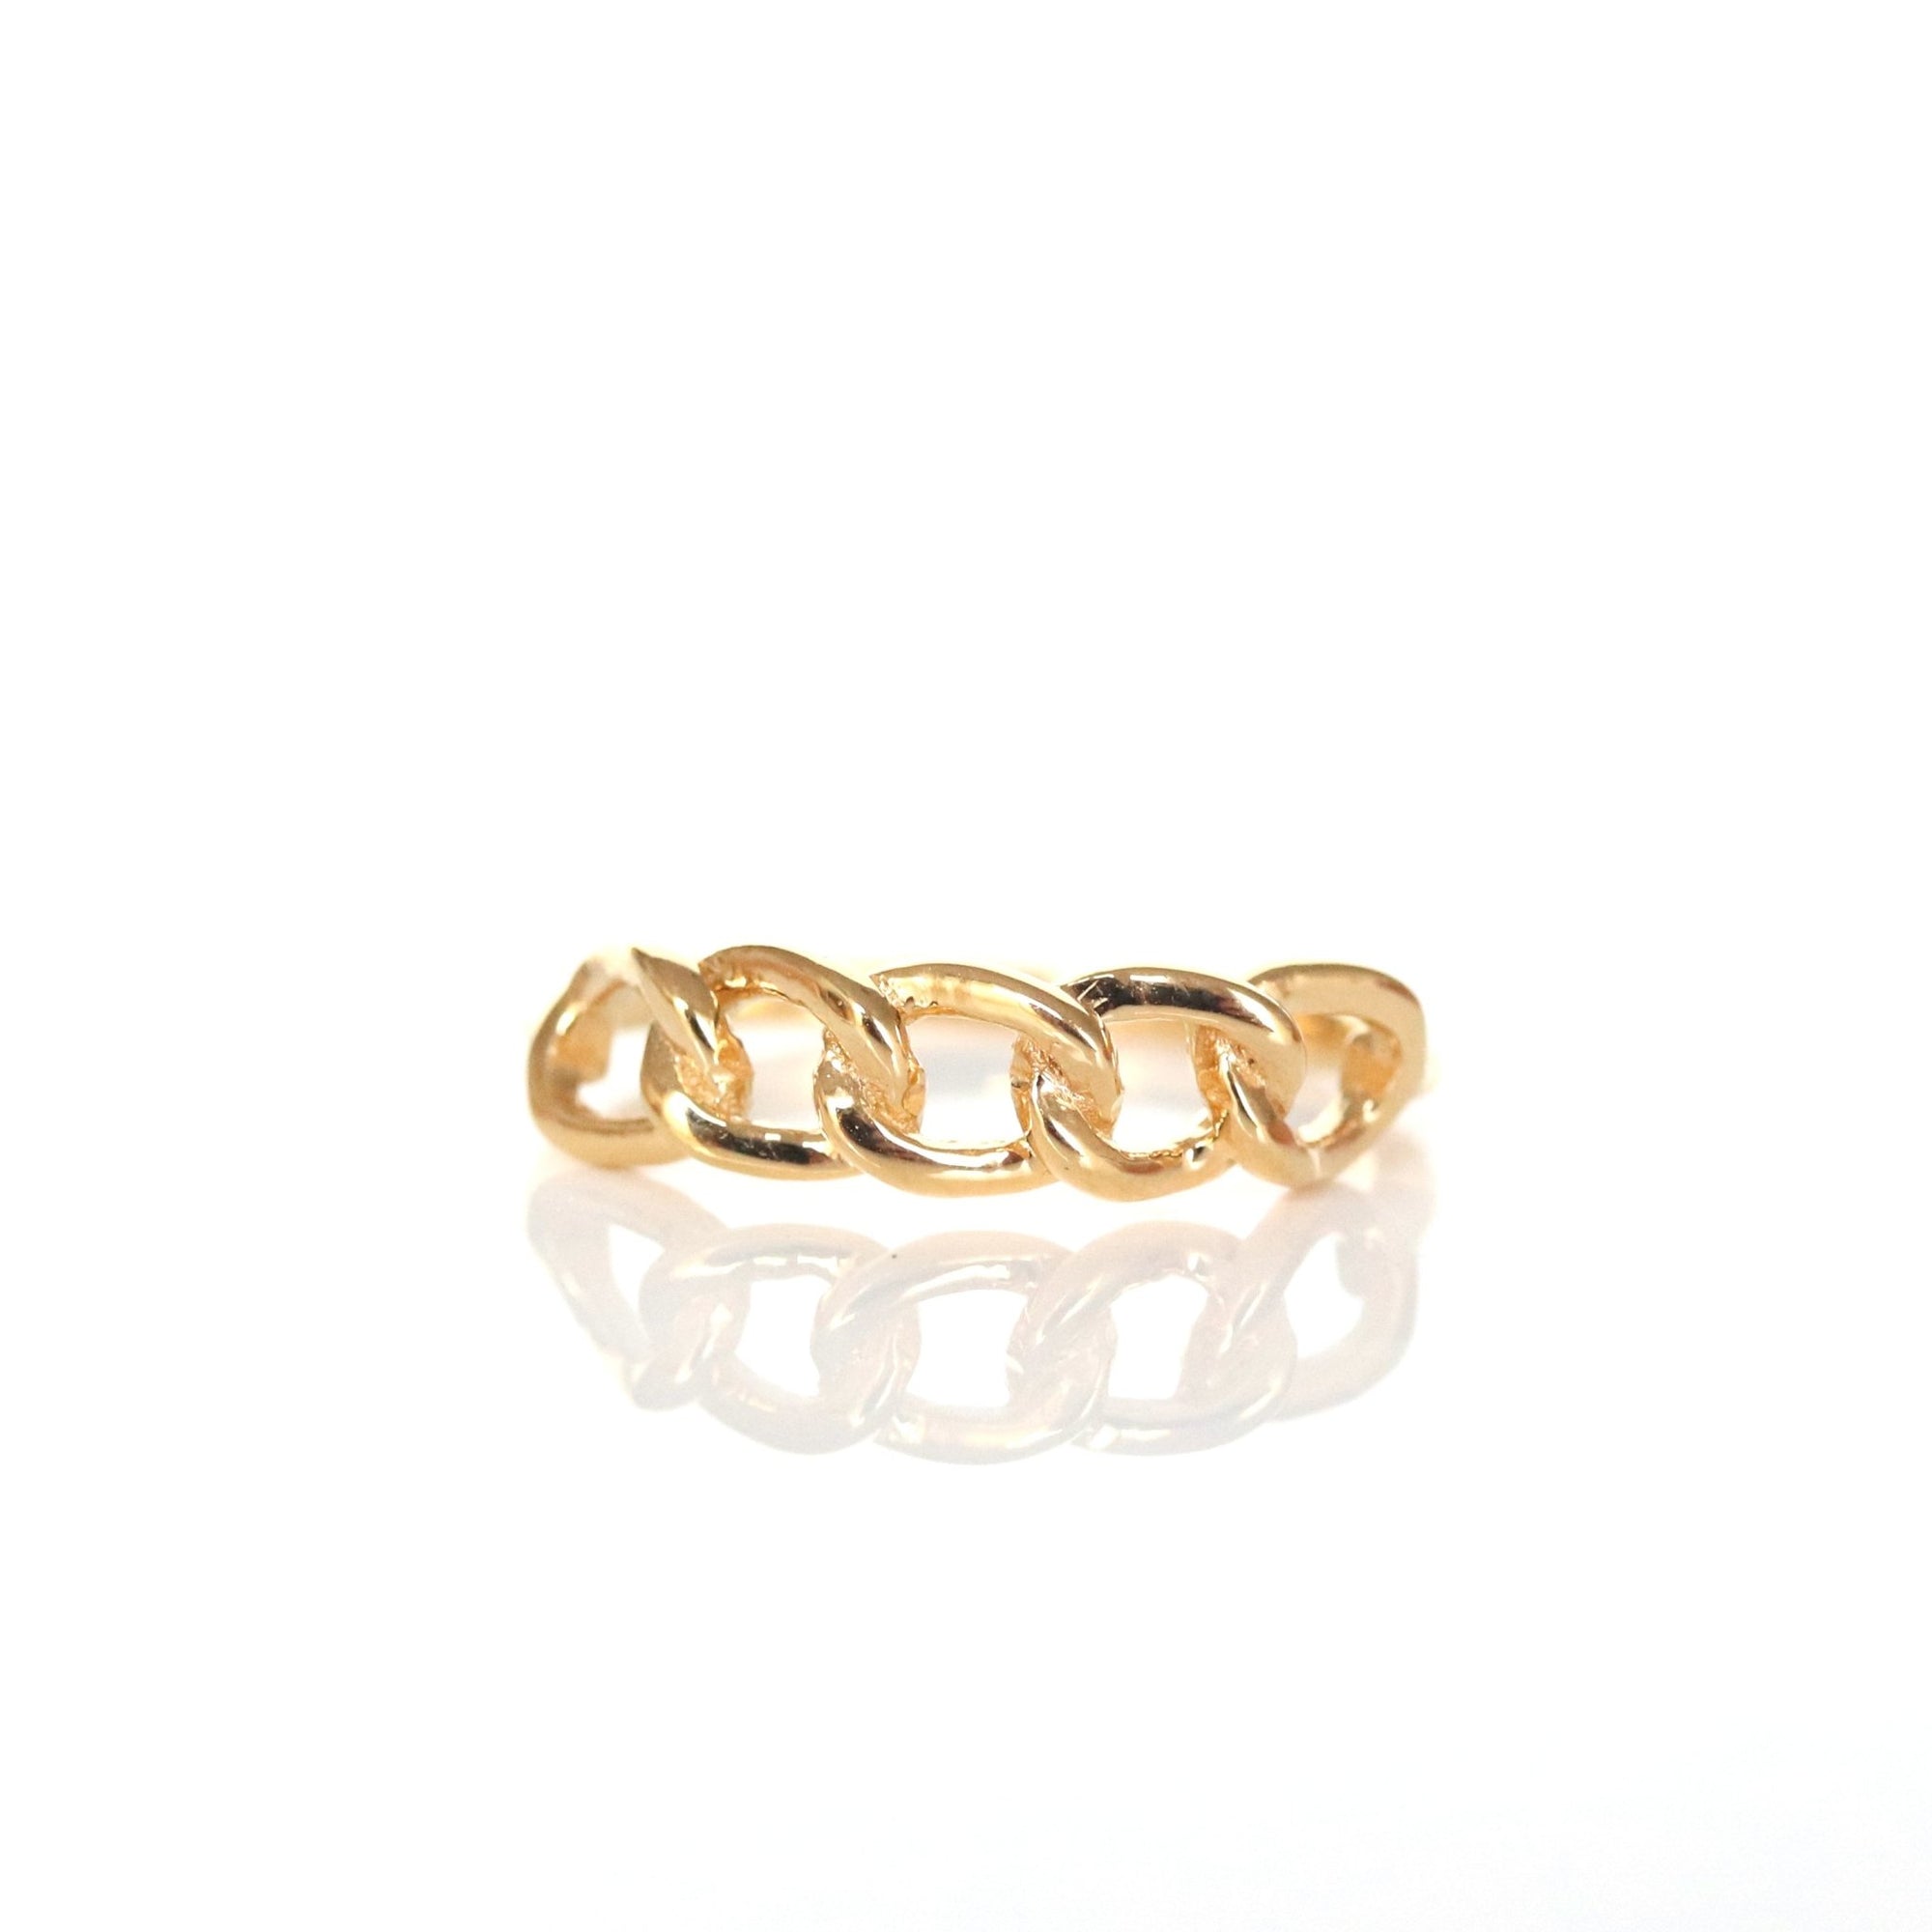 POISE CABLE LINK RING - GOLD - SO PRETTY CARA COTTER